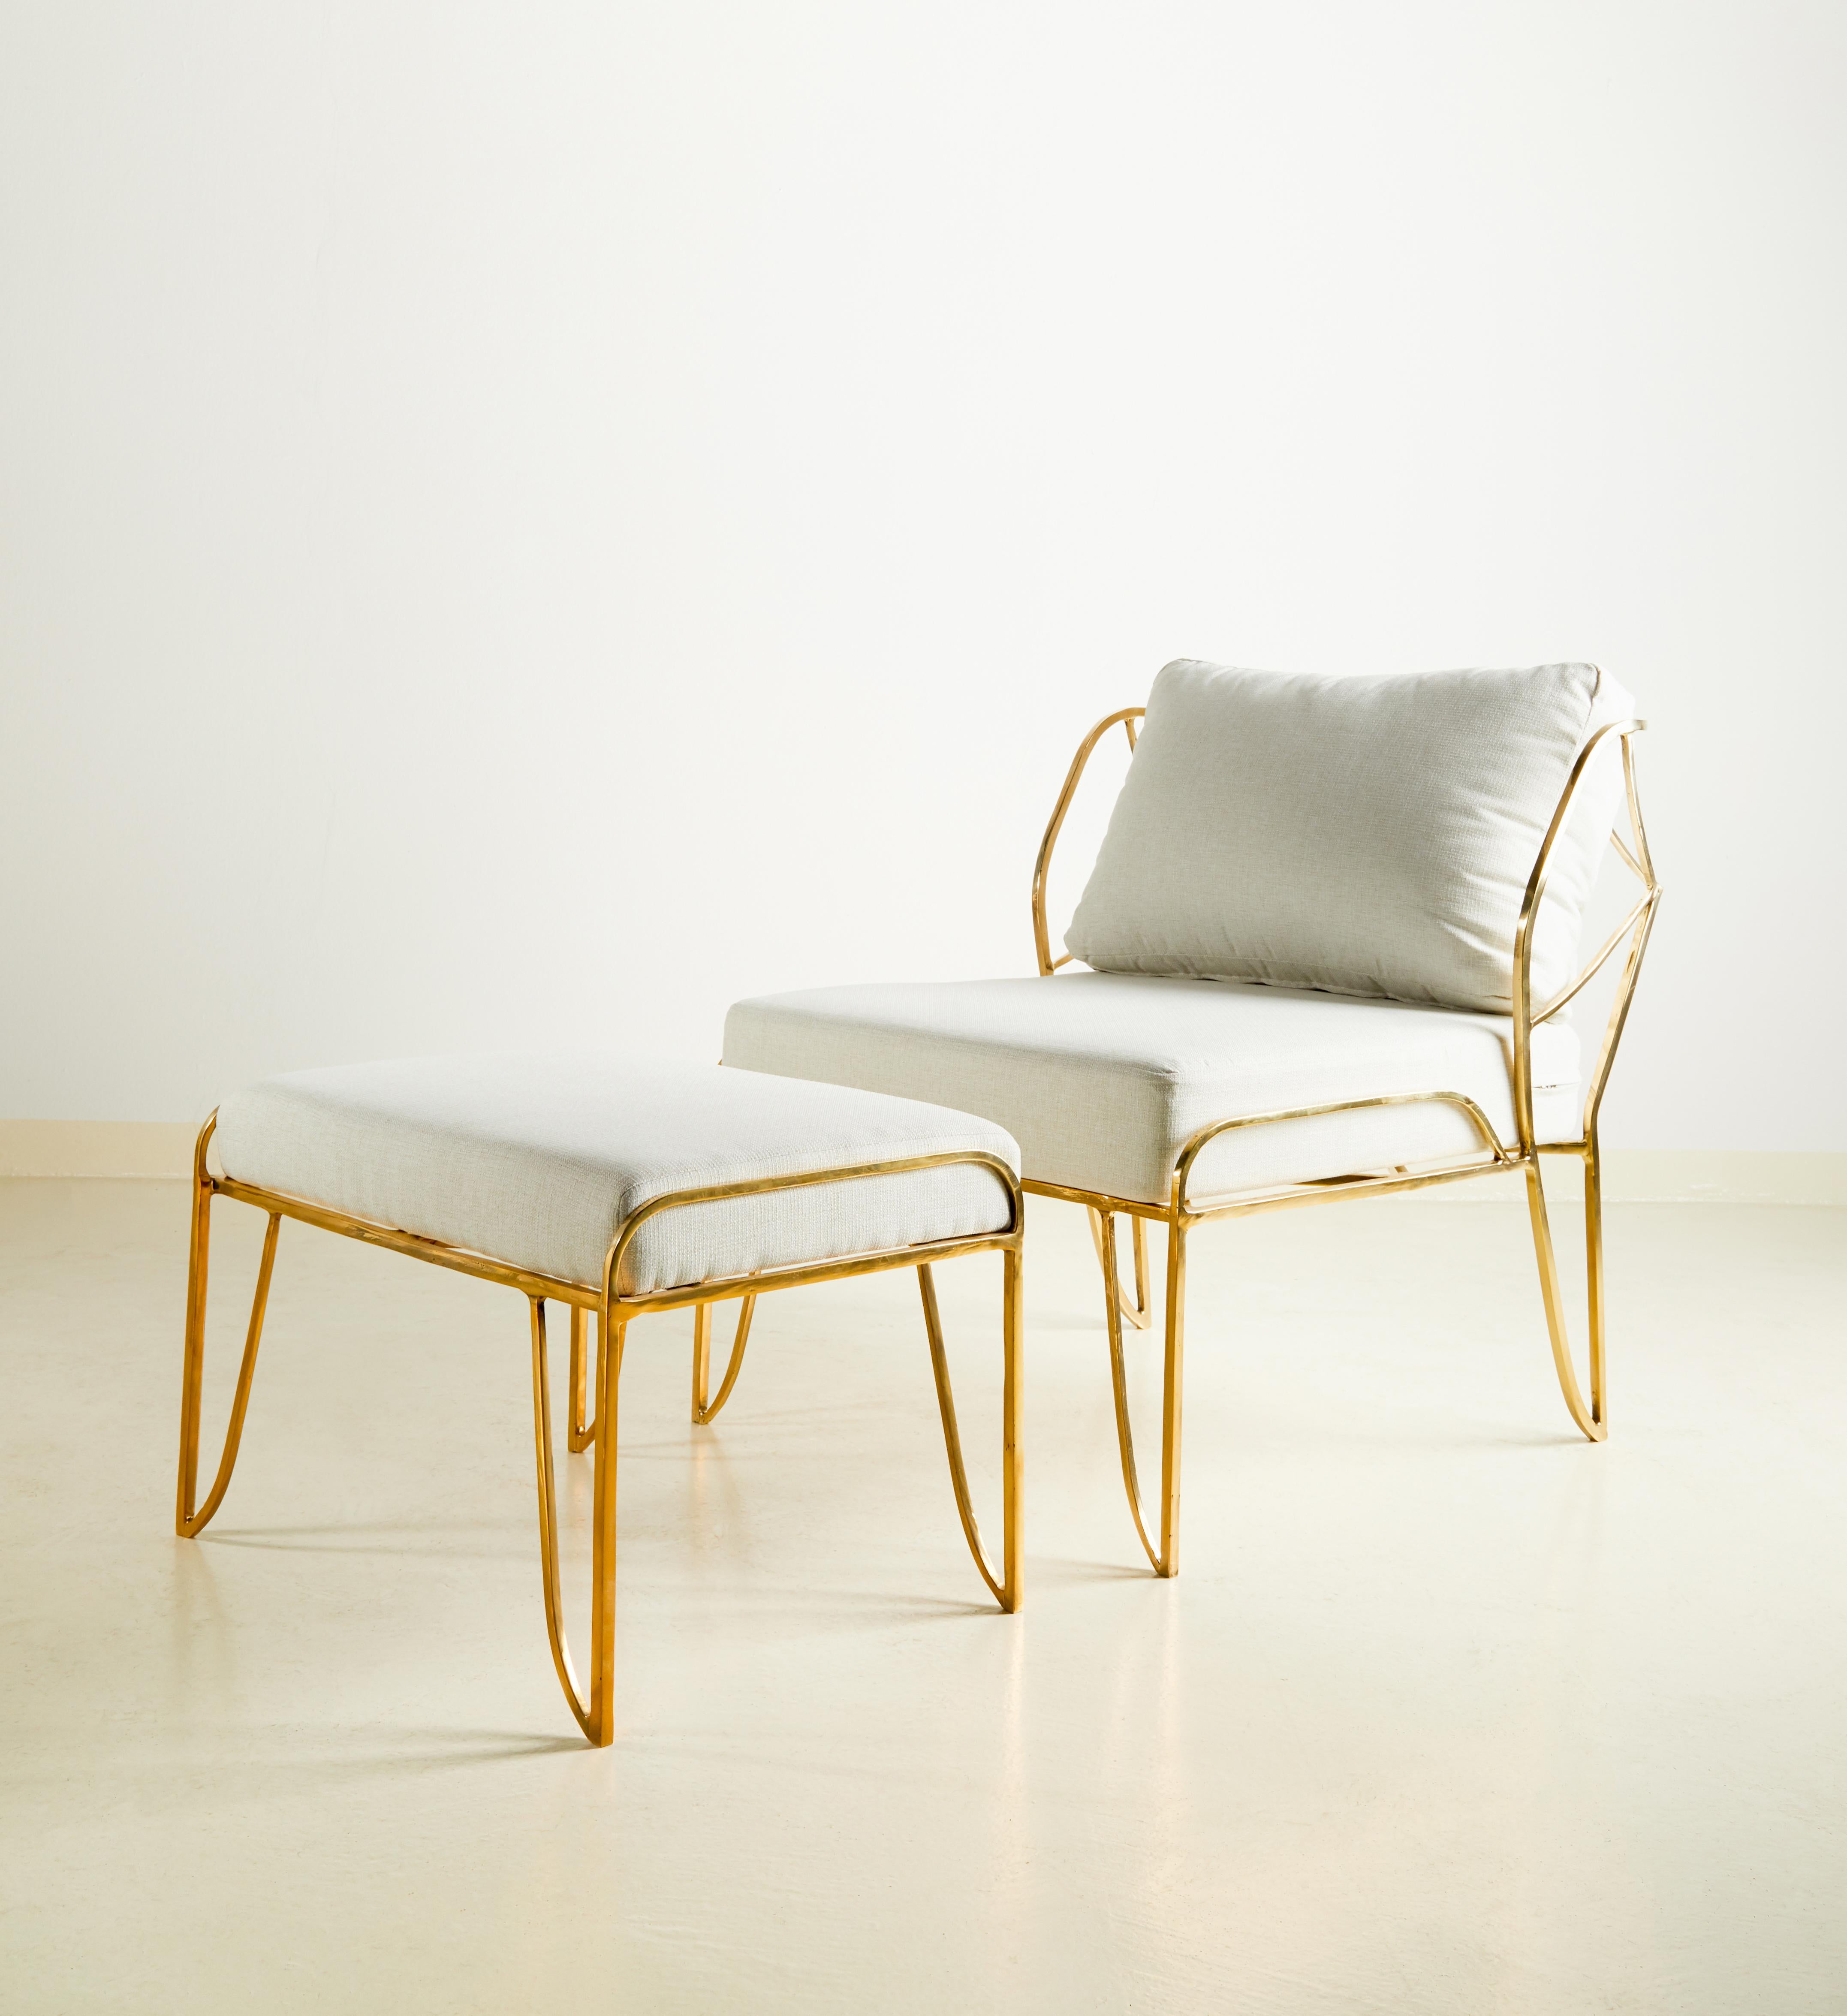 Brass hand-sculpted armchair and stool, Lena, Misaya.
Dimensions:
Chair: H 76 x W 65 x L 80 cm
Stool: 38 x 61 x 42 cm
Hand-sculpted brass and marble tables.